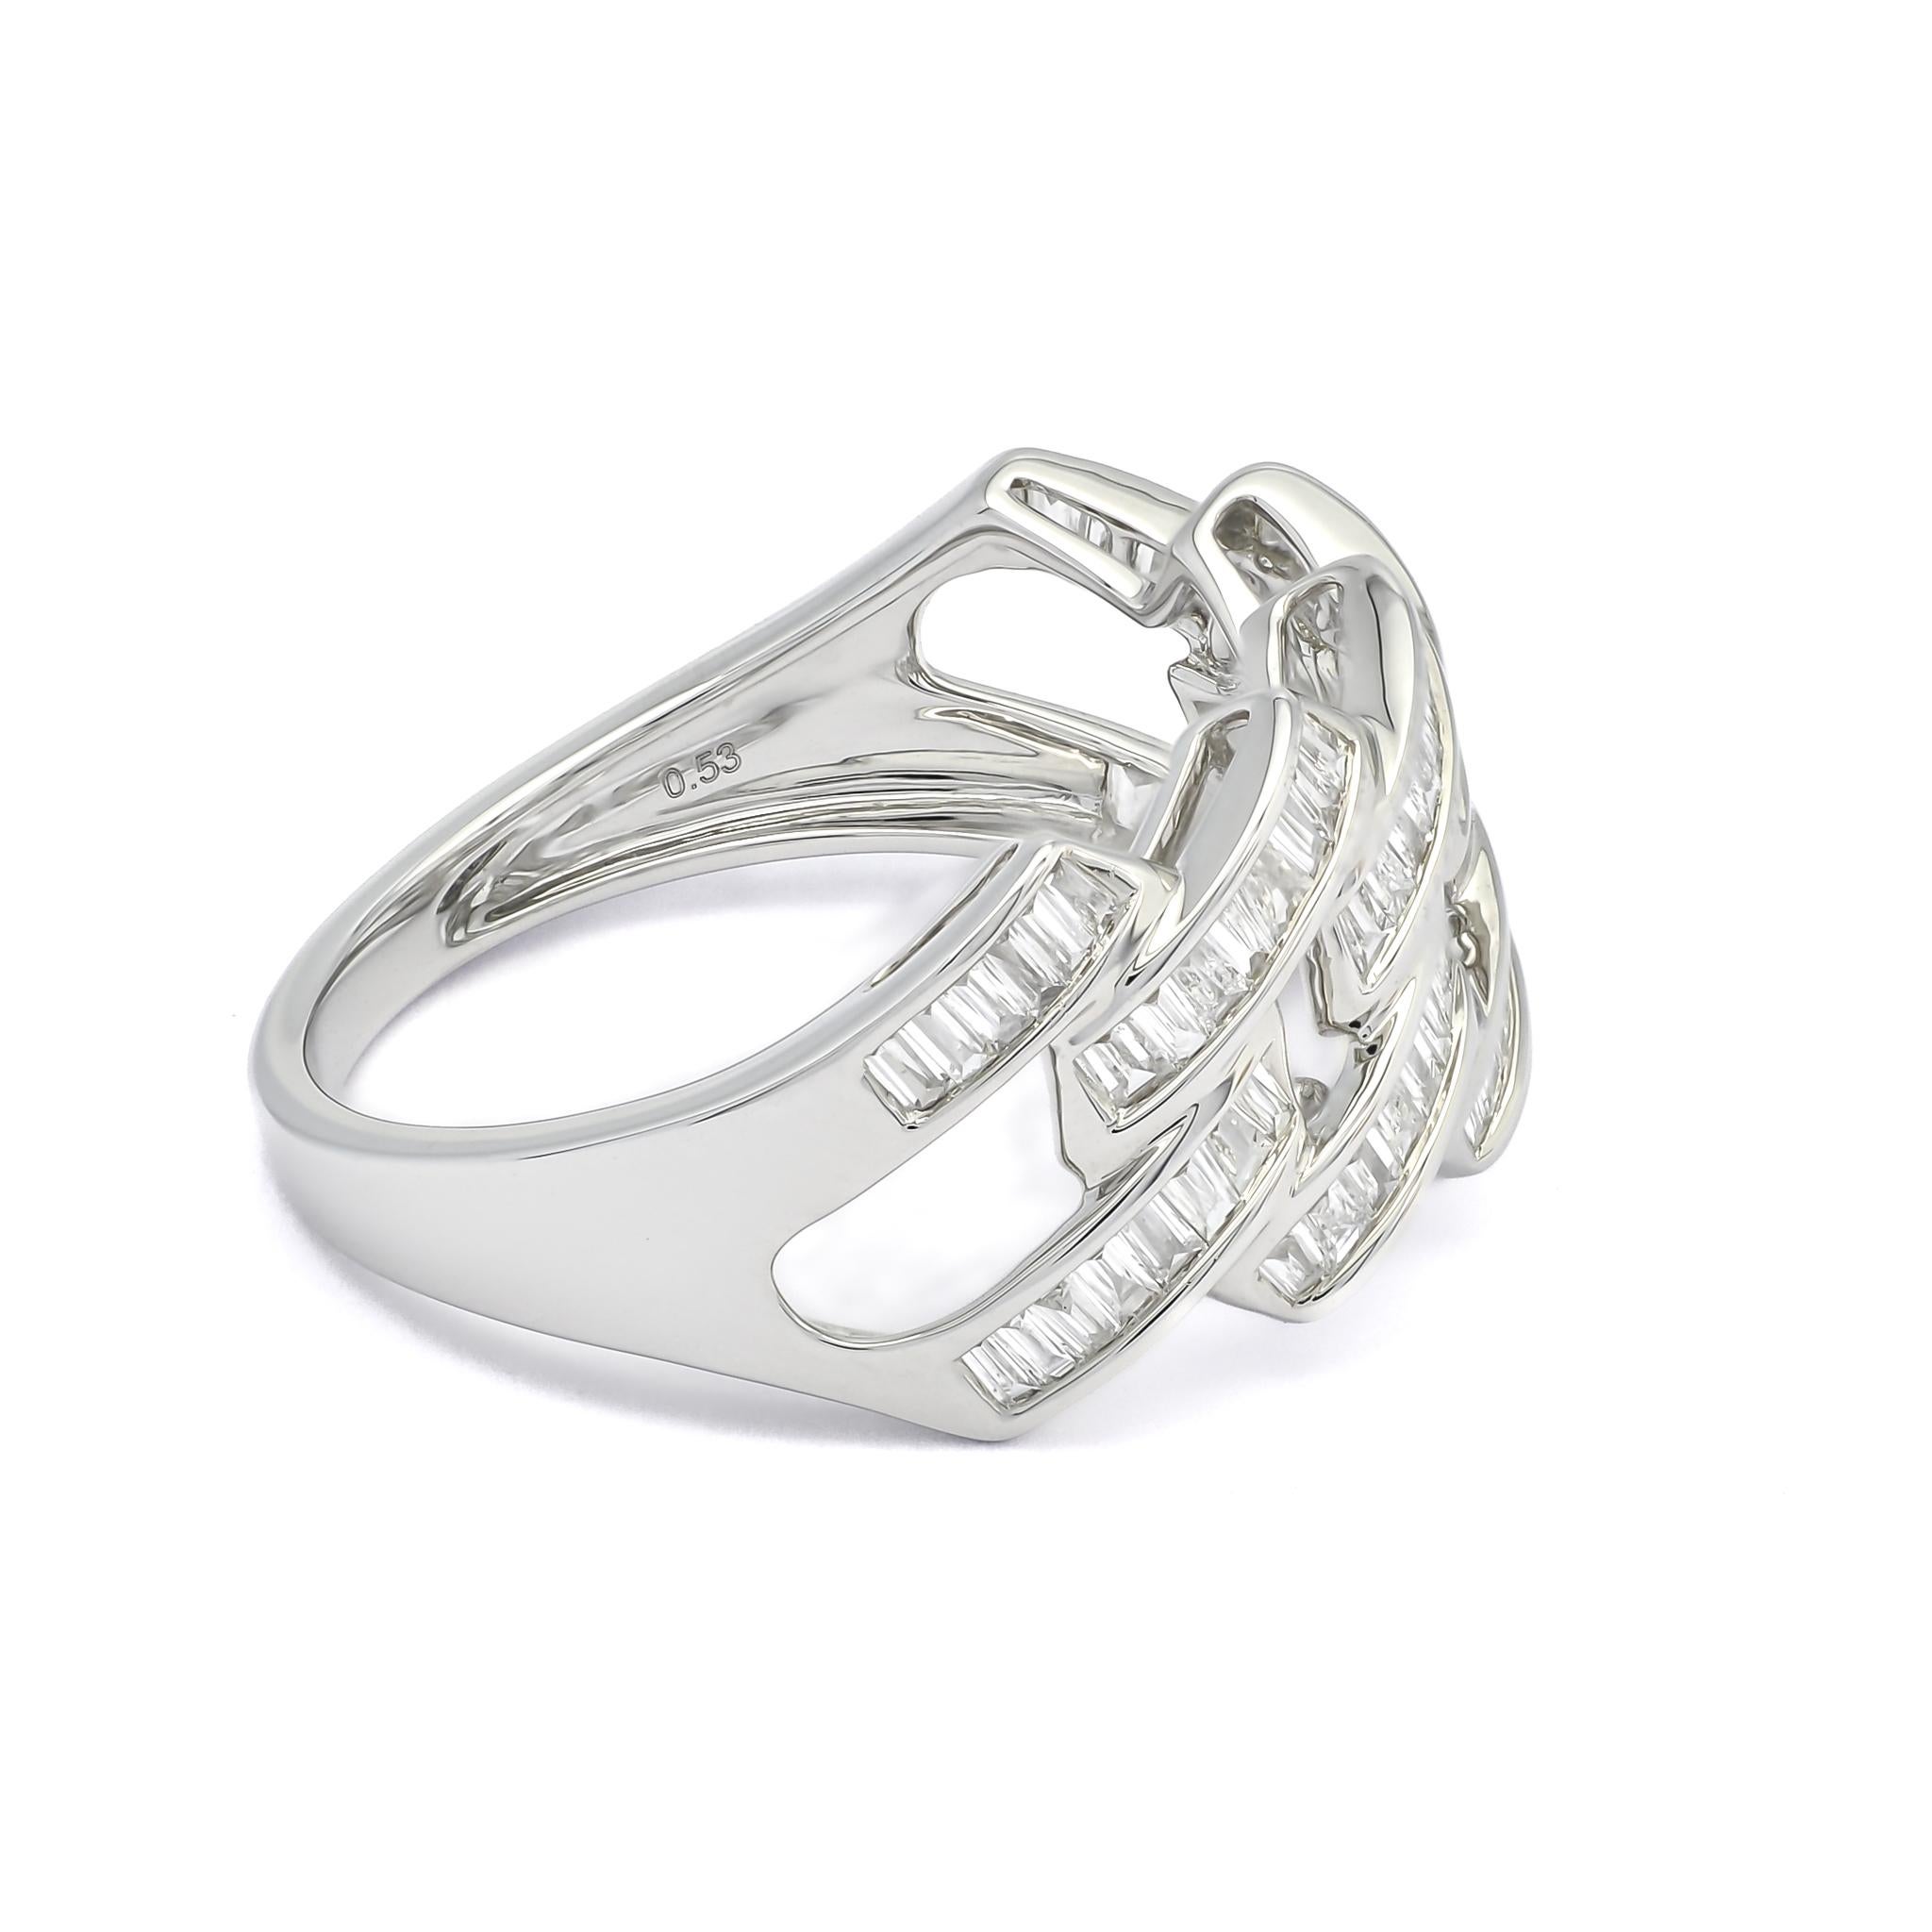 Introducing the Bold Settings Baguette Diamonds White Gold Ring, a designer exclusive piece that effortlessly captivates with its unparalleled elegance and timeless sophistication. This statement-making ring is a true masterpiece, meticulously